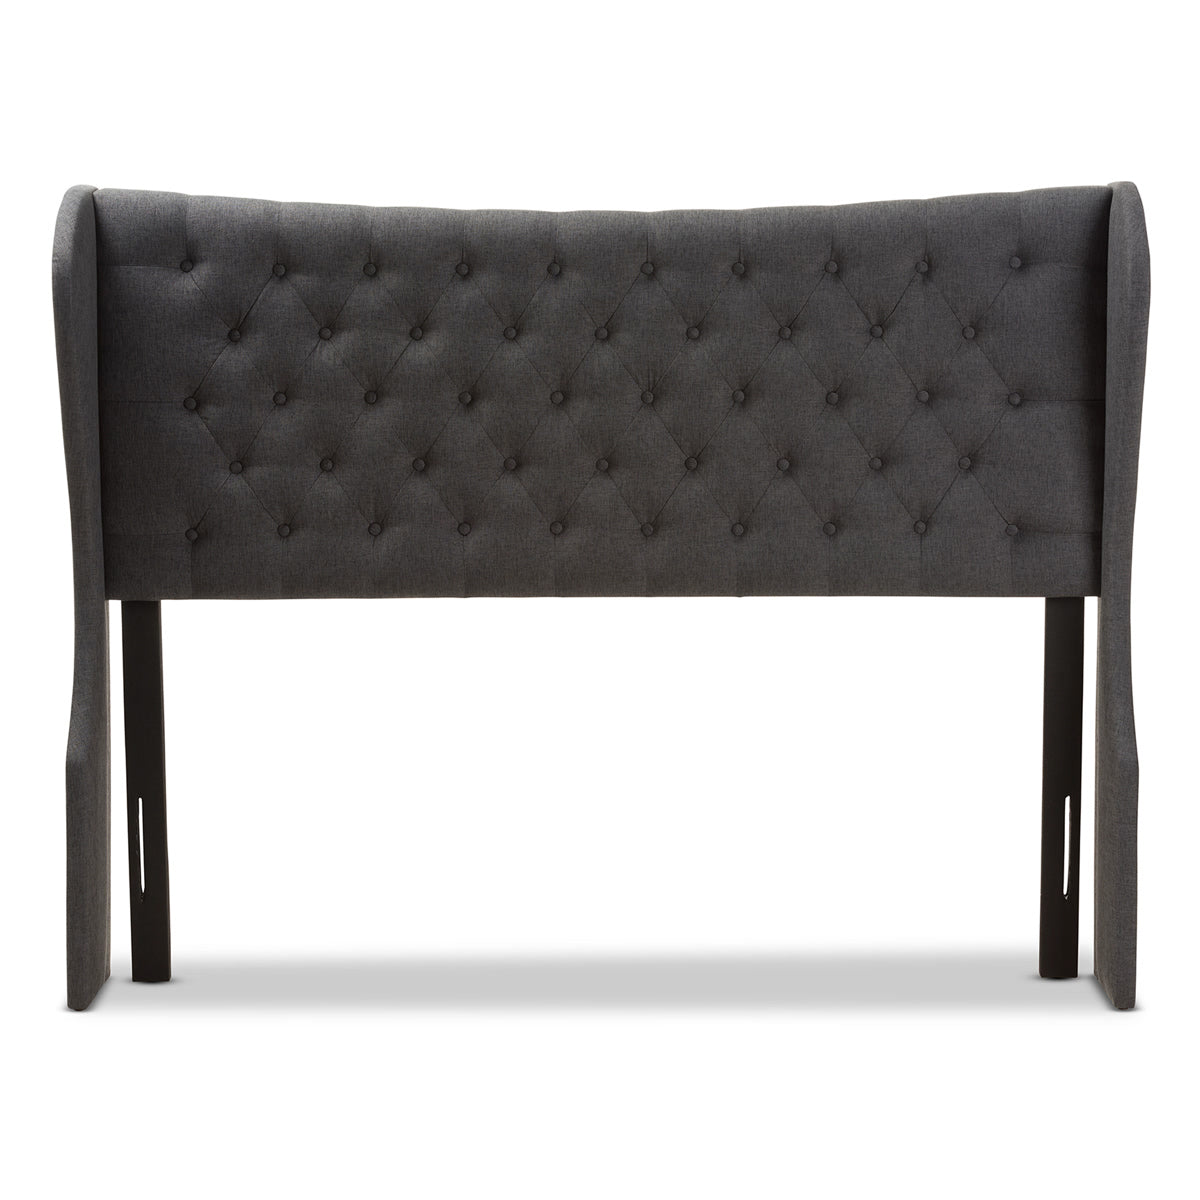 Baxton Studio Cadence Modern and Contemporary Dark Grey Fabric Button-Tufted King Size Winged Headboard Baxton Studio-Headboards-Minimal And Modern - 2